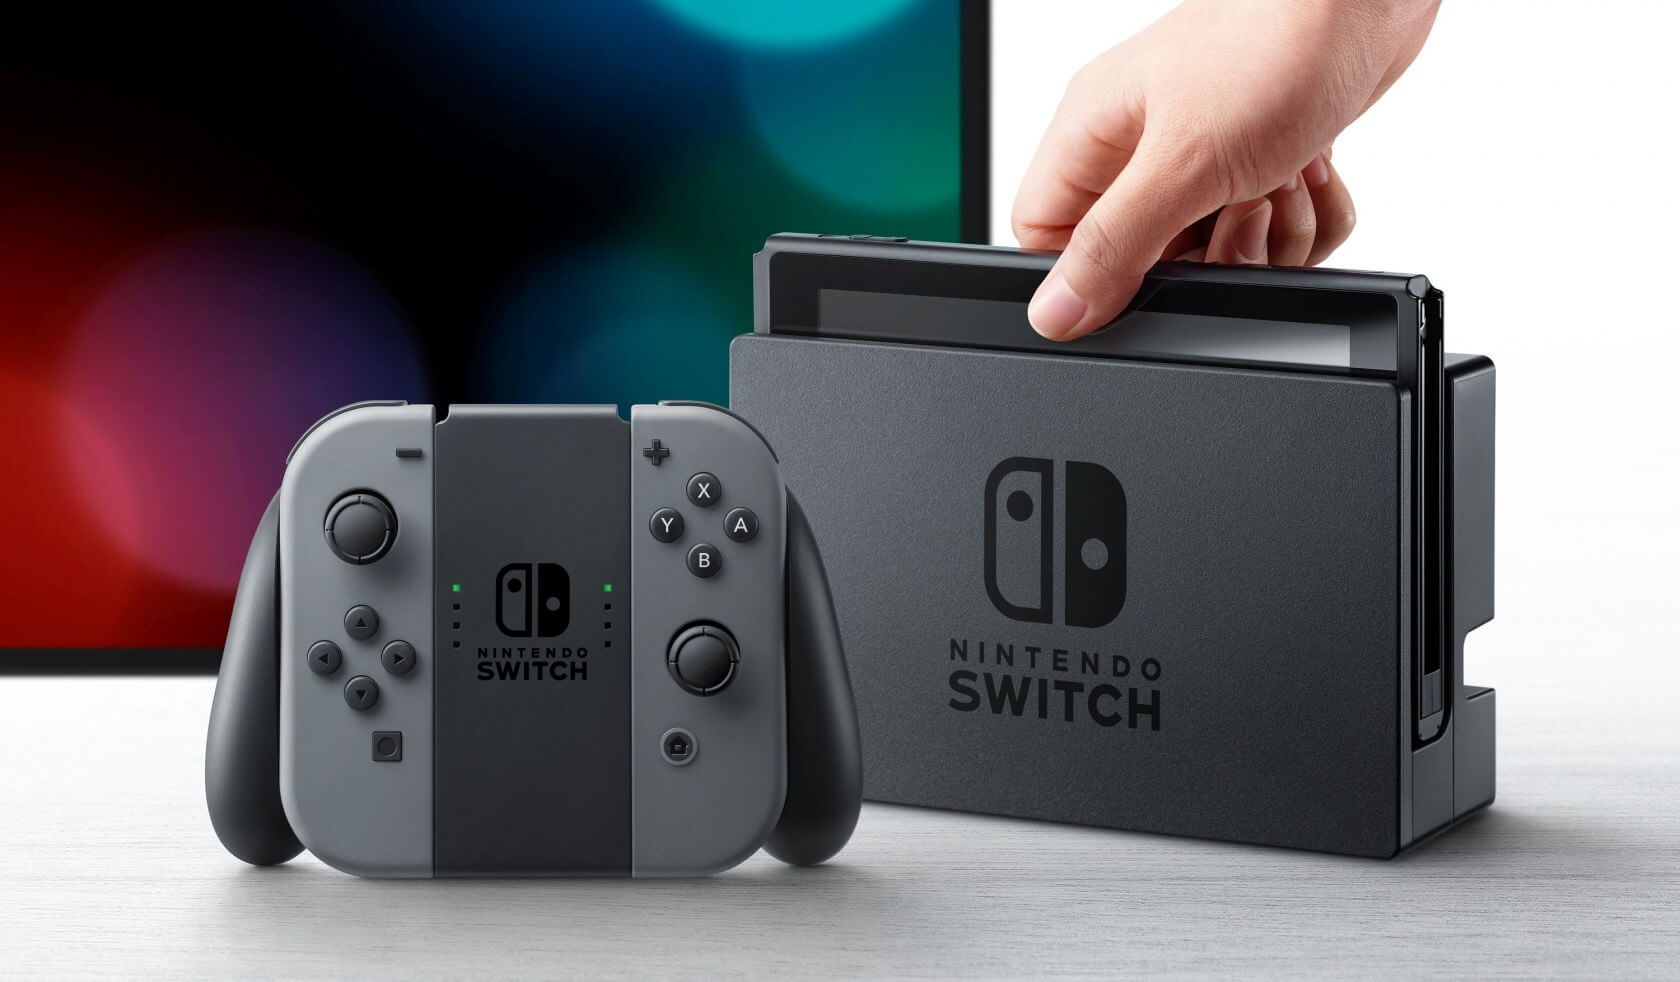 Nintendo is reportedly planning to launch a cheaper, more portable Switch in 2019